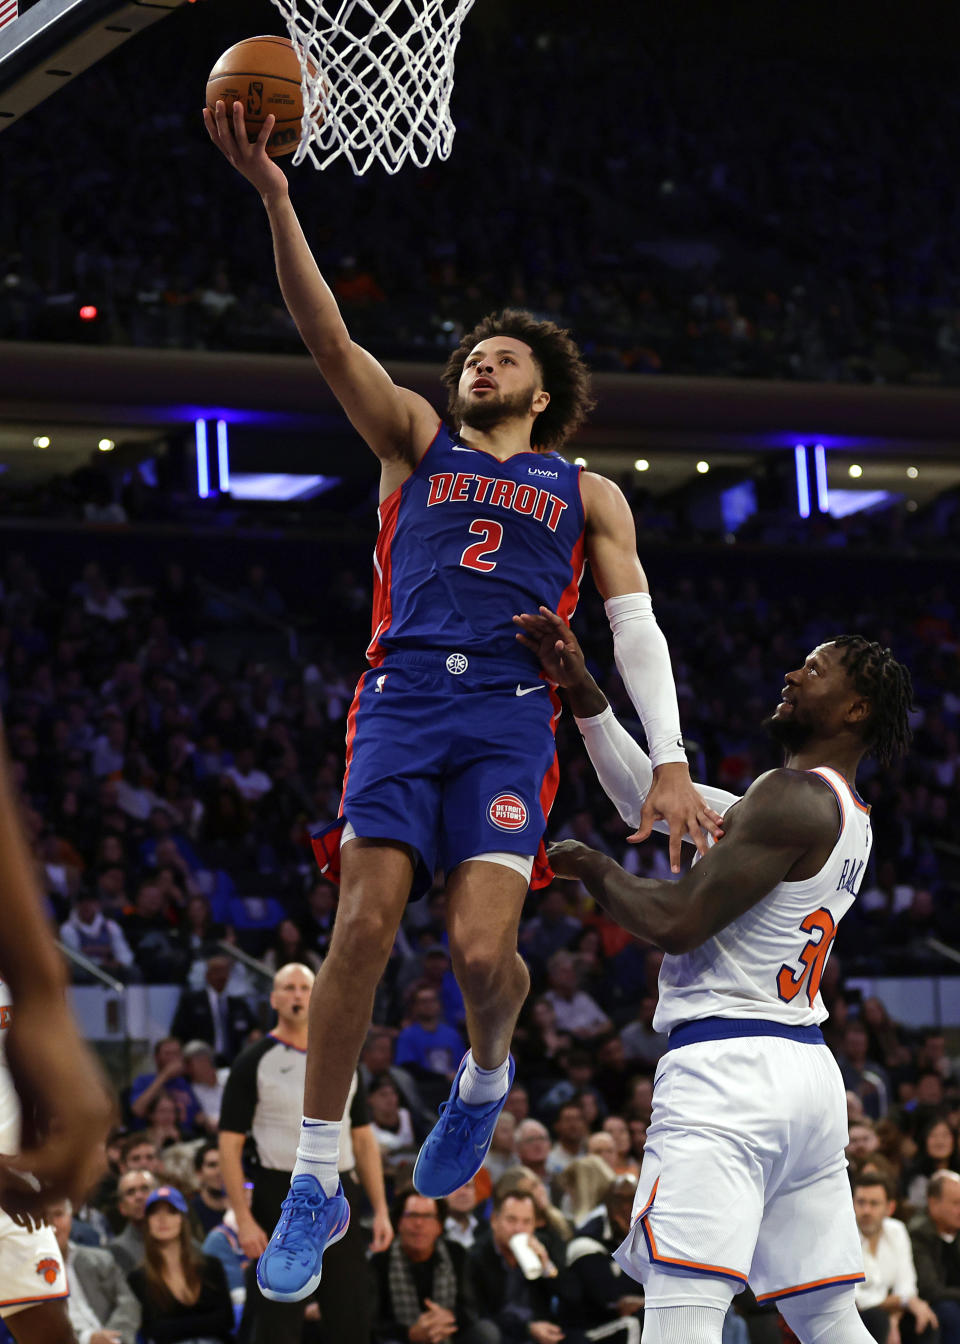 Detroit Pistons guard Cade Cunningham (2) drives to the basket past New York Knicks forward Julius Randle during the first half of an NBA basketball game Friday, Oct. 21, 2022, in New York. (AP Photo/Adam Hunger)